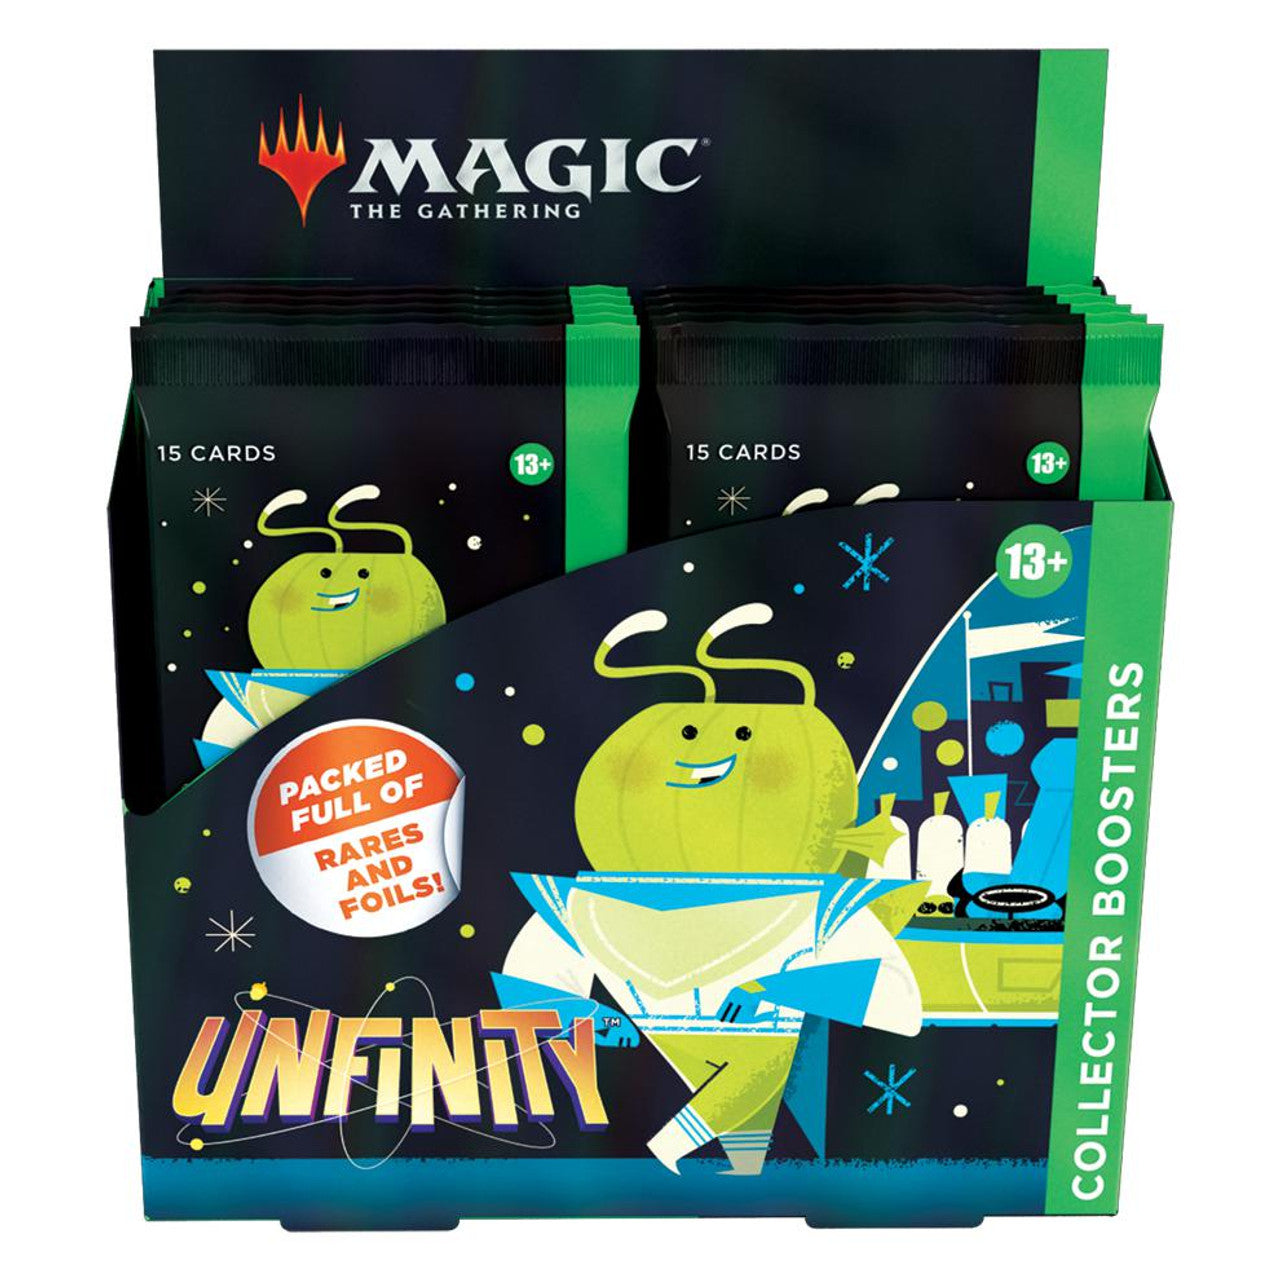 Unfinity Booster Boxes